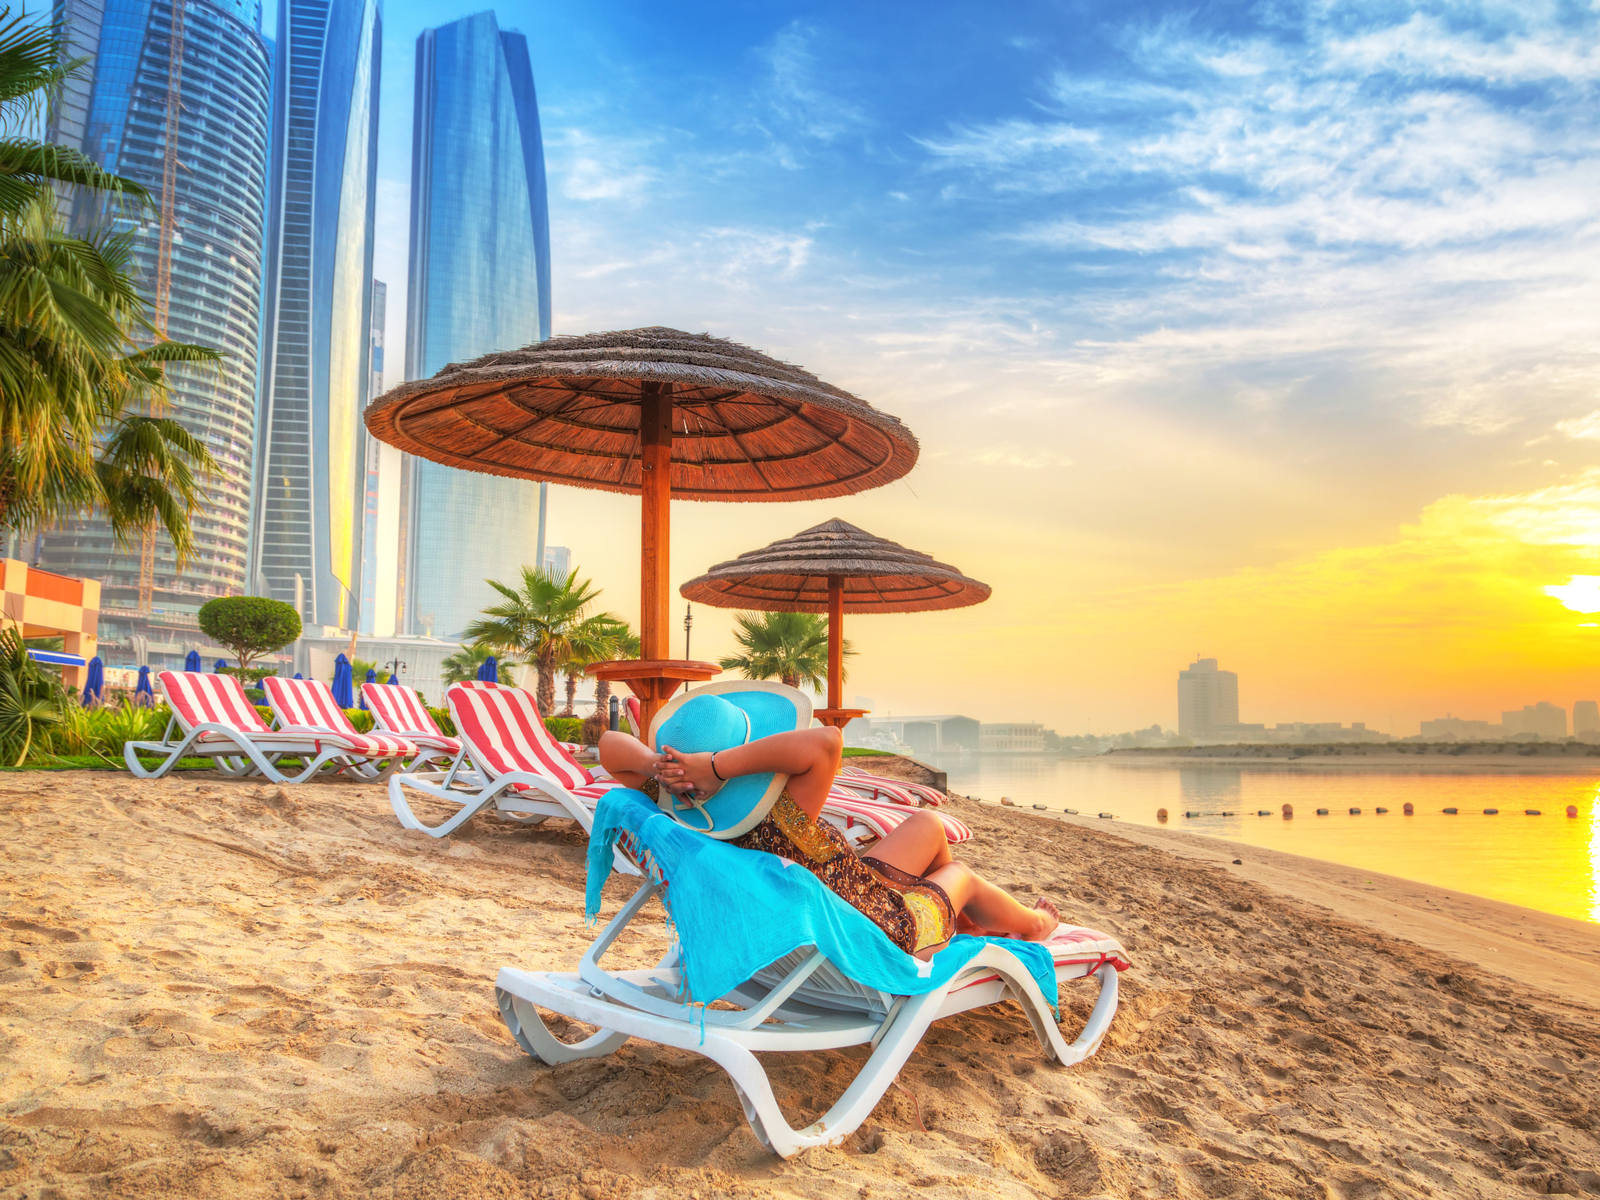 Image of a woman relaxing on the beach during the cheapest time to visit Dubai, mid-Summer